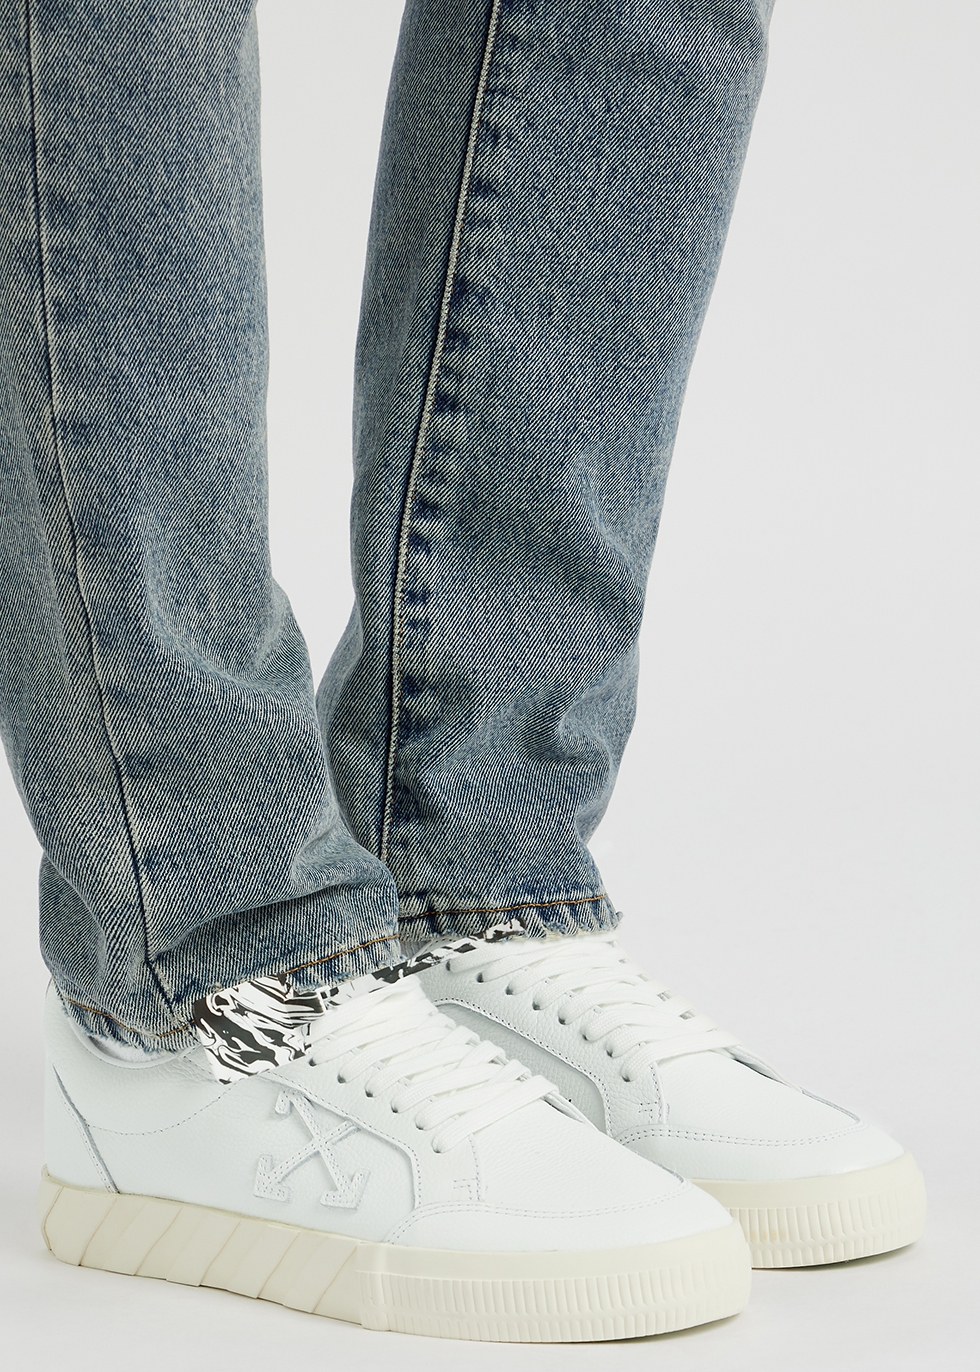 Off-White Vulcanized white leather sneakers - Harvey Nichols